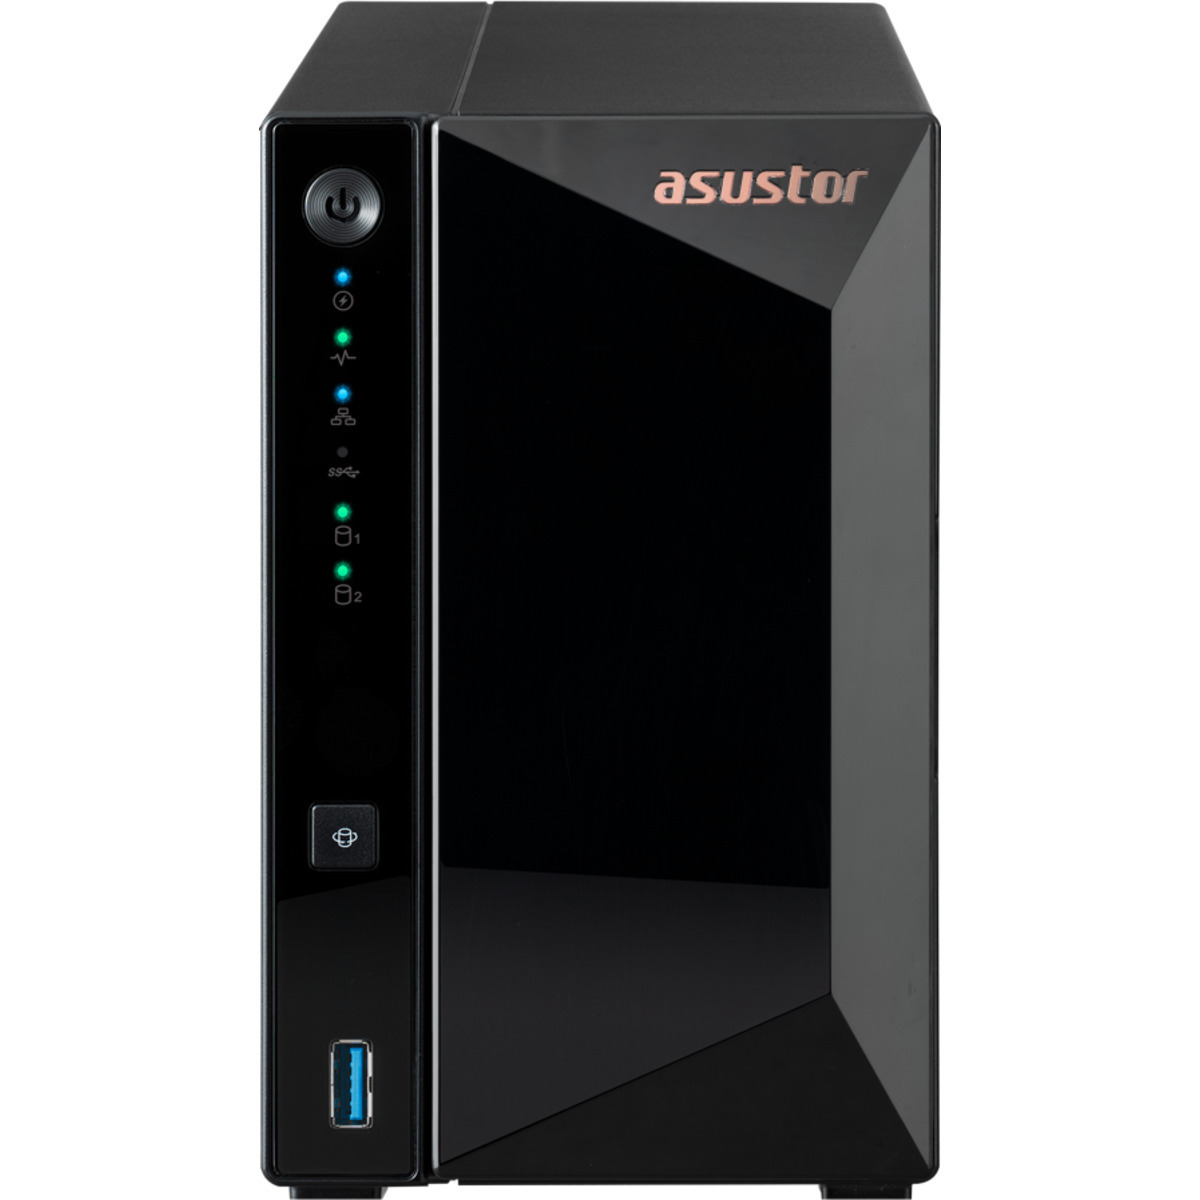 ASUSTOR DRIVESTOR 2 Pro AS3302T 24tb 2-Bay Desktop Personal / Basic Home / Small Office NAS - Network Attached Storage Device 1x24tb Seagate EXOS X24 ST24000NM002H 3.5 7200rpm SATA 6Gb/s HDD ENTERPRISE Class Drives Installed - Burn-In Tested DRIVESTOR 2 Pro AS3302T